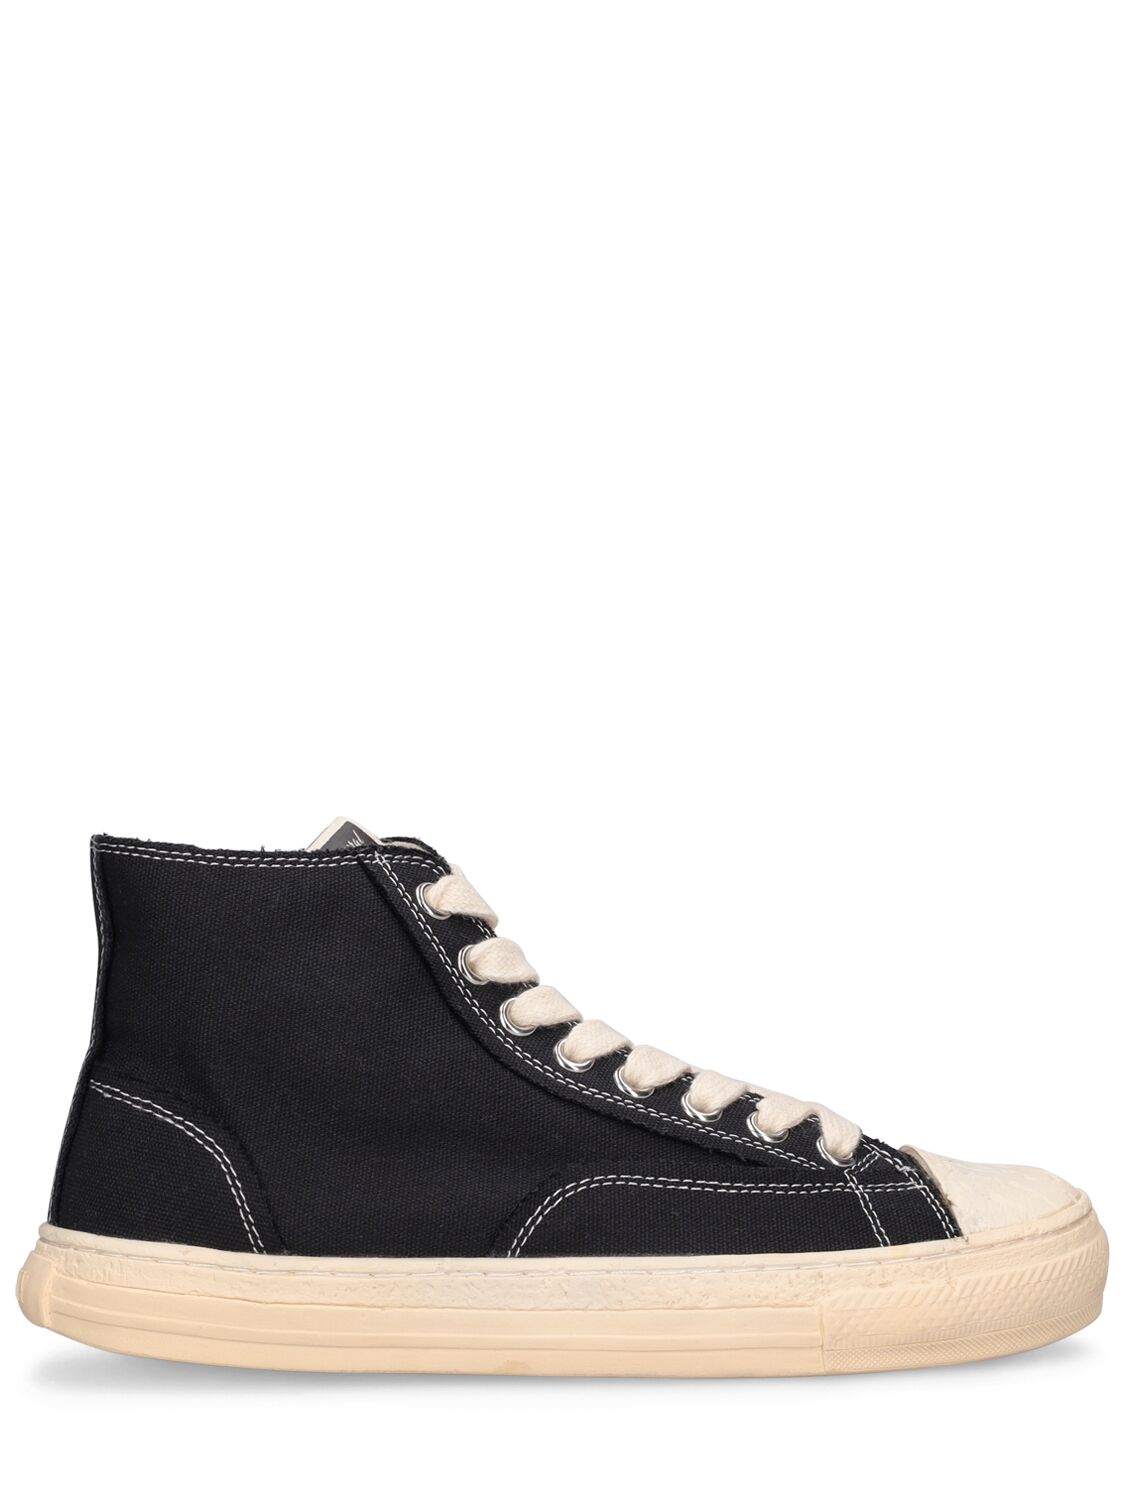 Past Sole Canvas High Top Sneakers